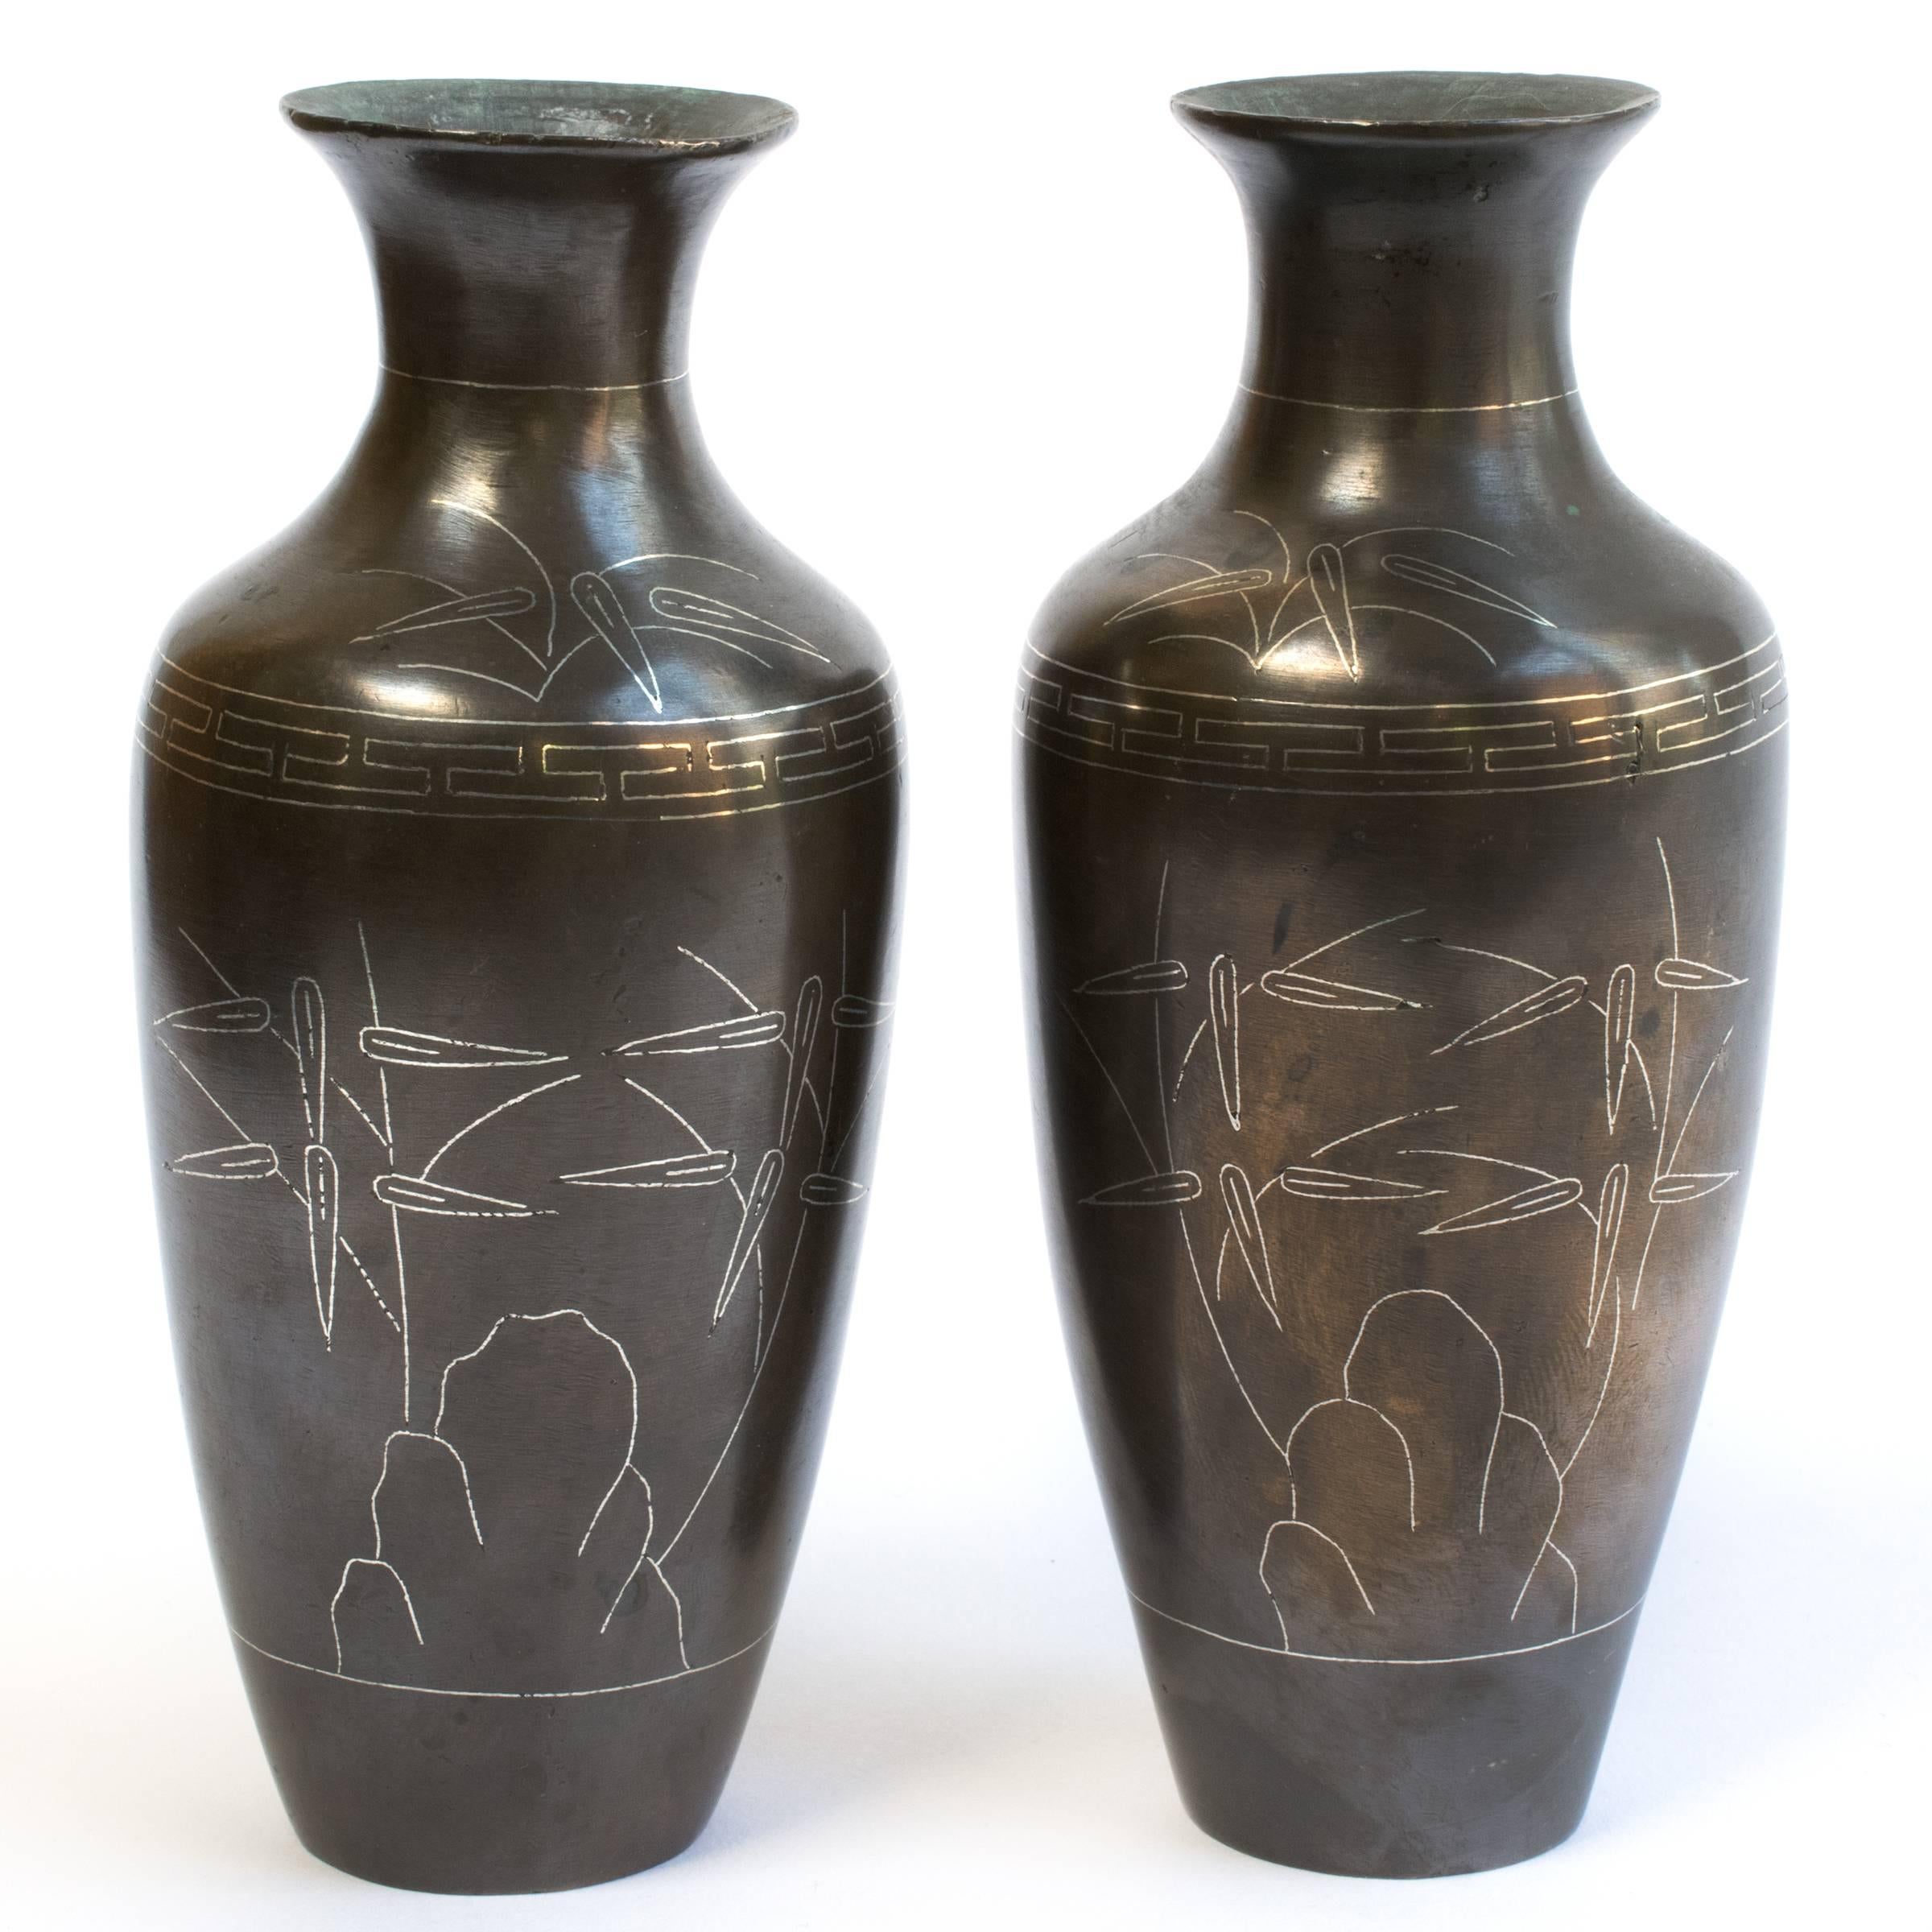 With a flaring lip and striking profile, connoisseurs often refer to these exquisite vases as “turnip-shaped”. Each was crafted out of bronze over two centuries ago, and is decorated with a silver inlay garden scene. The bases are signed with the